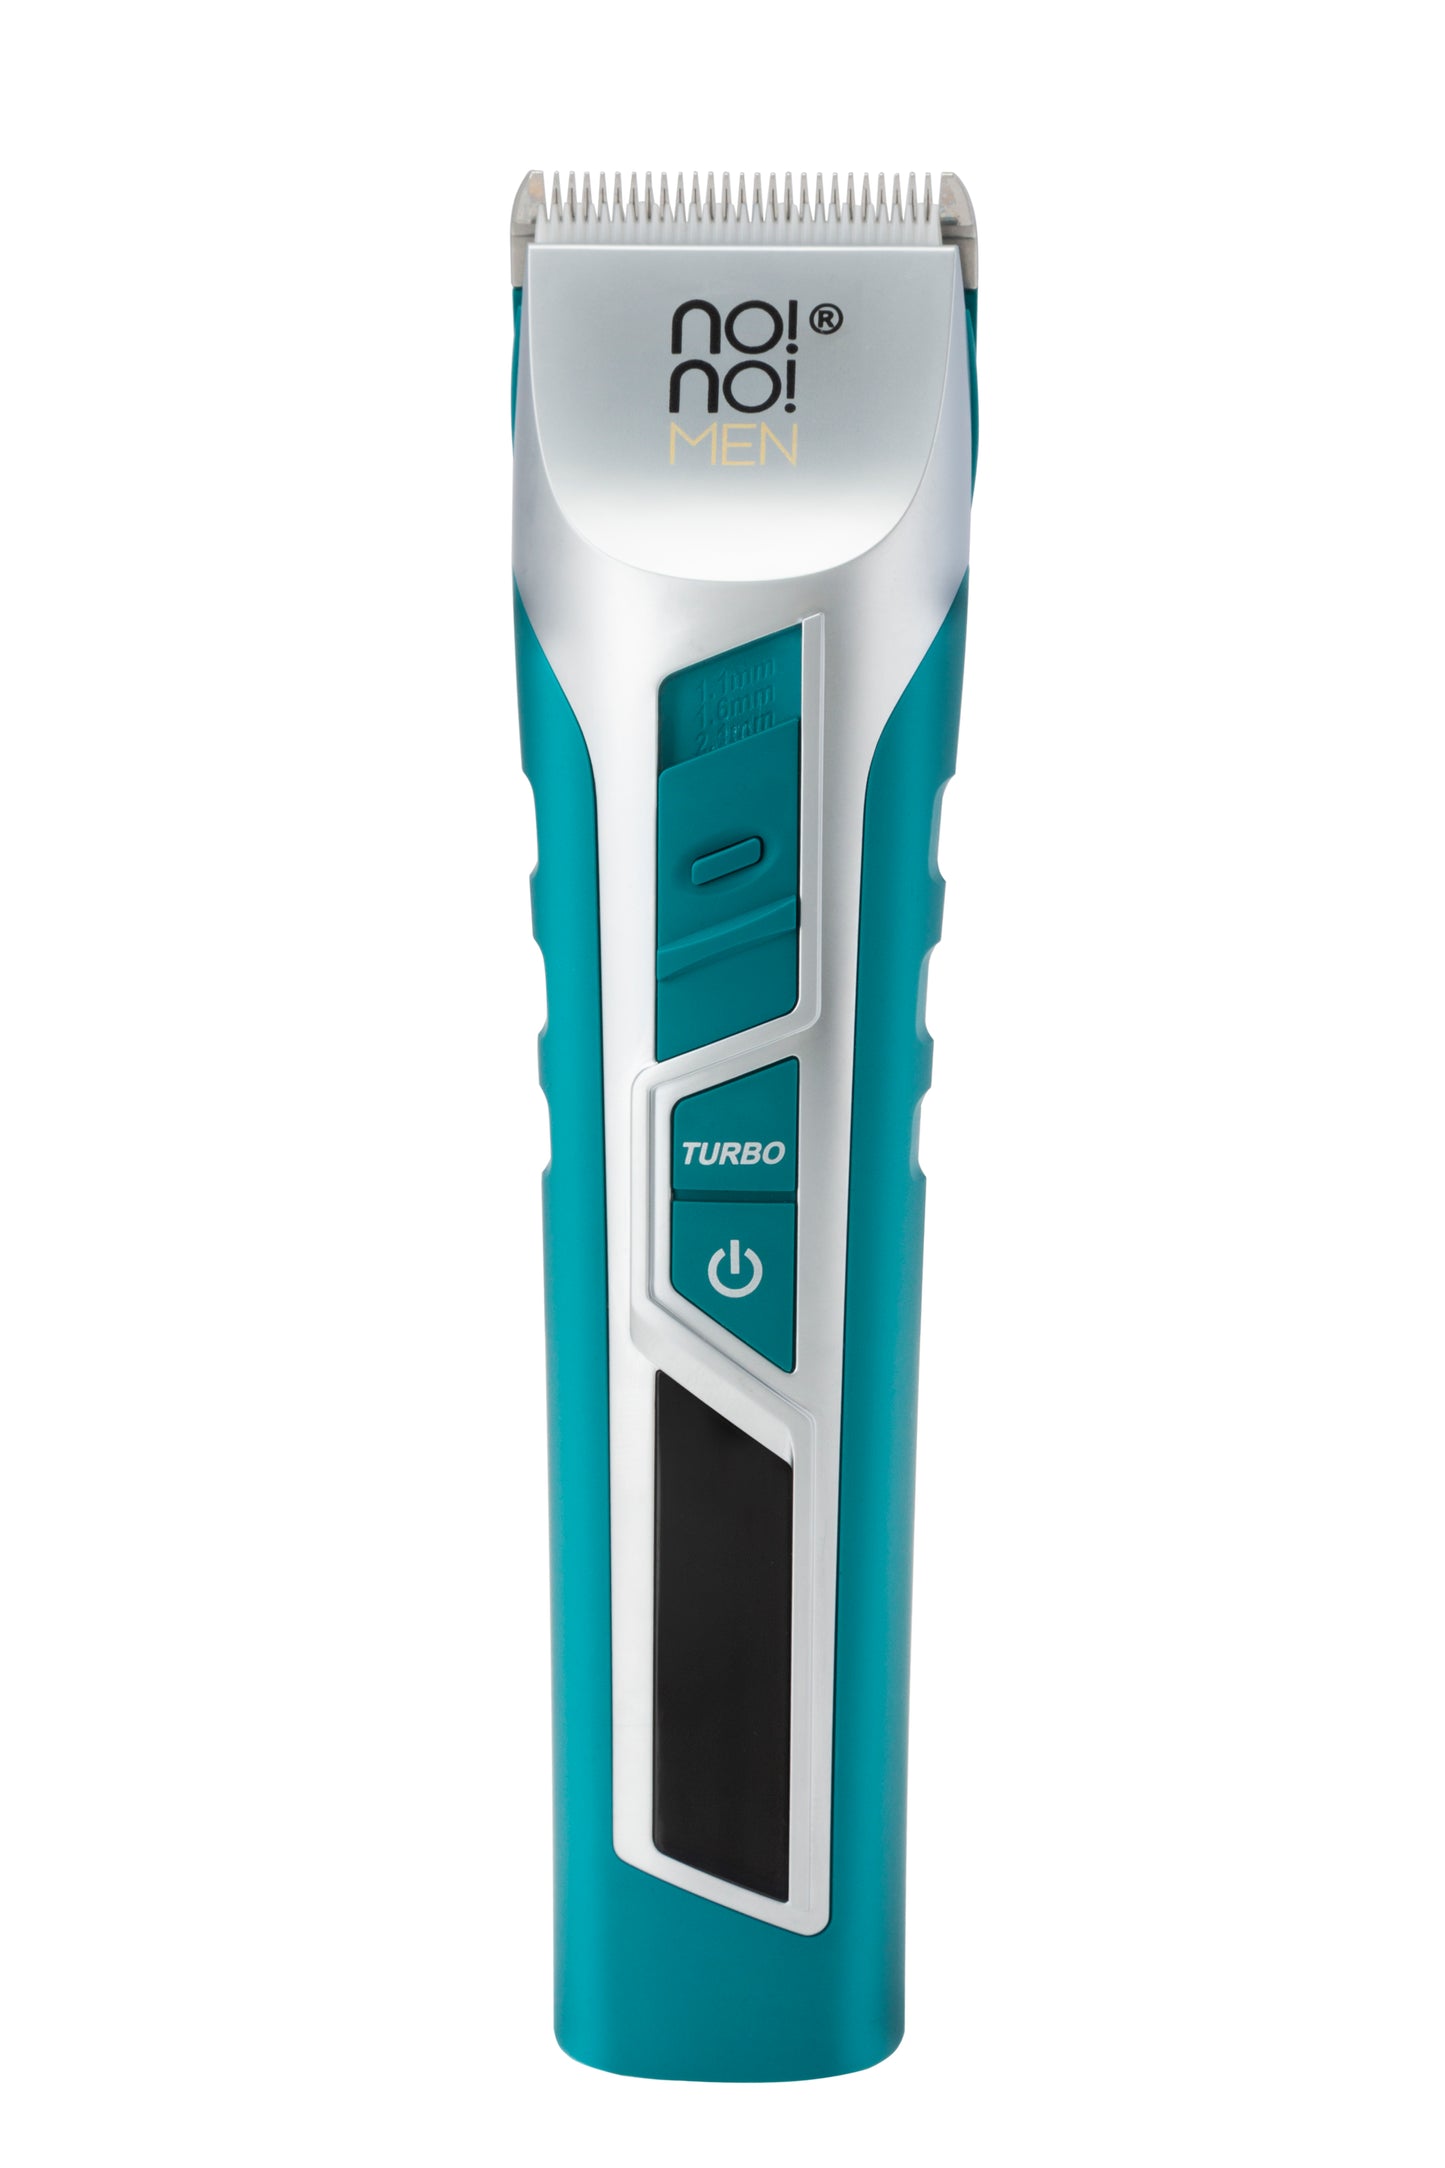 no!no!® Men's Elite Barber Face and Hair Trimmer